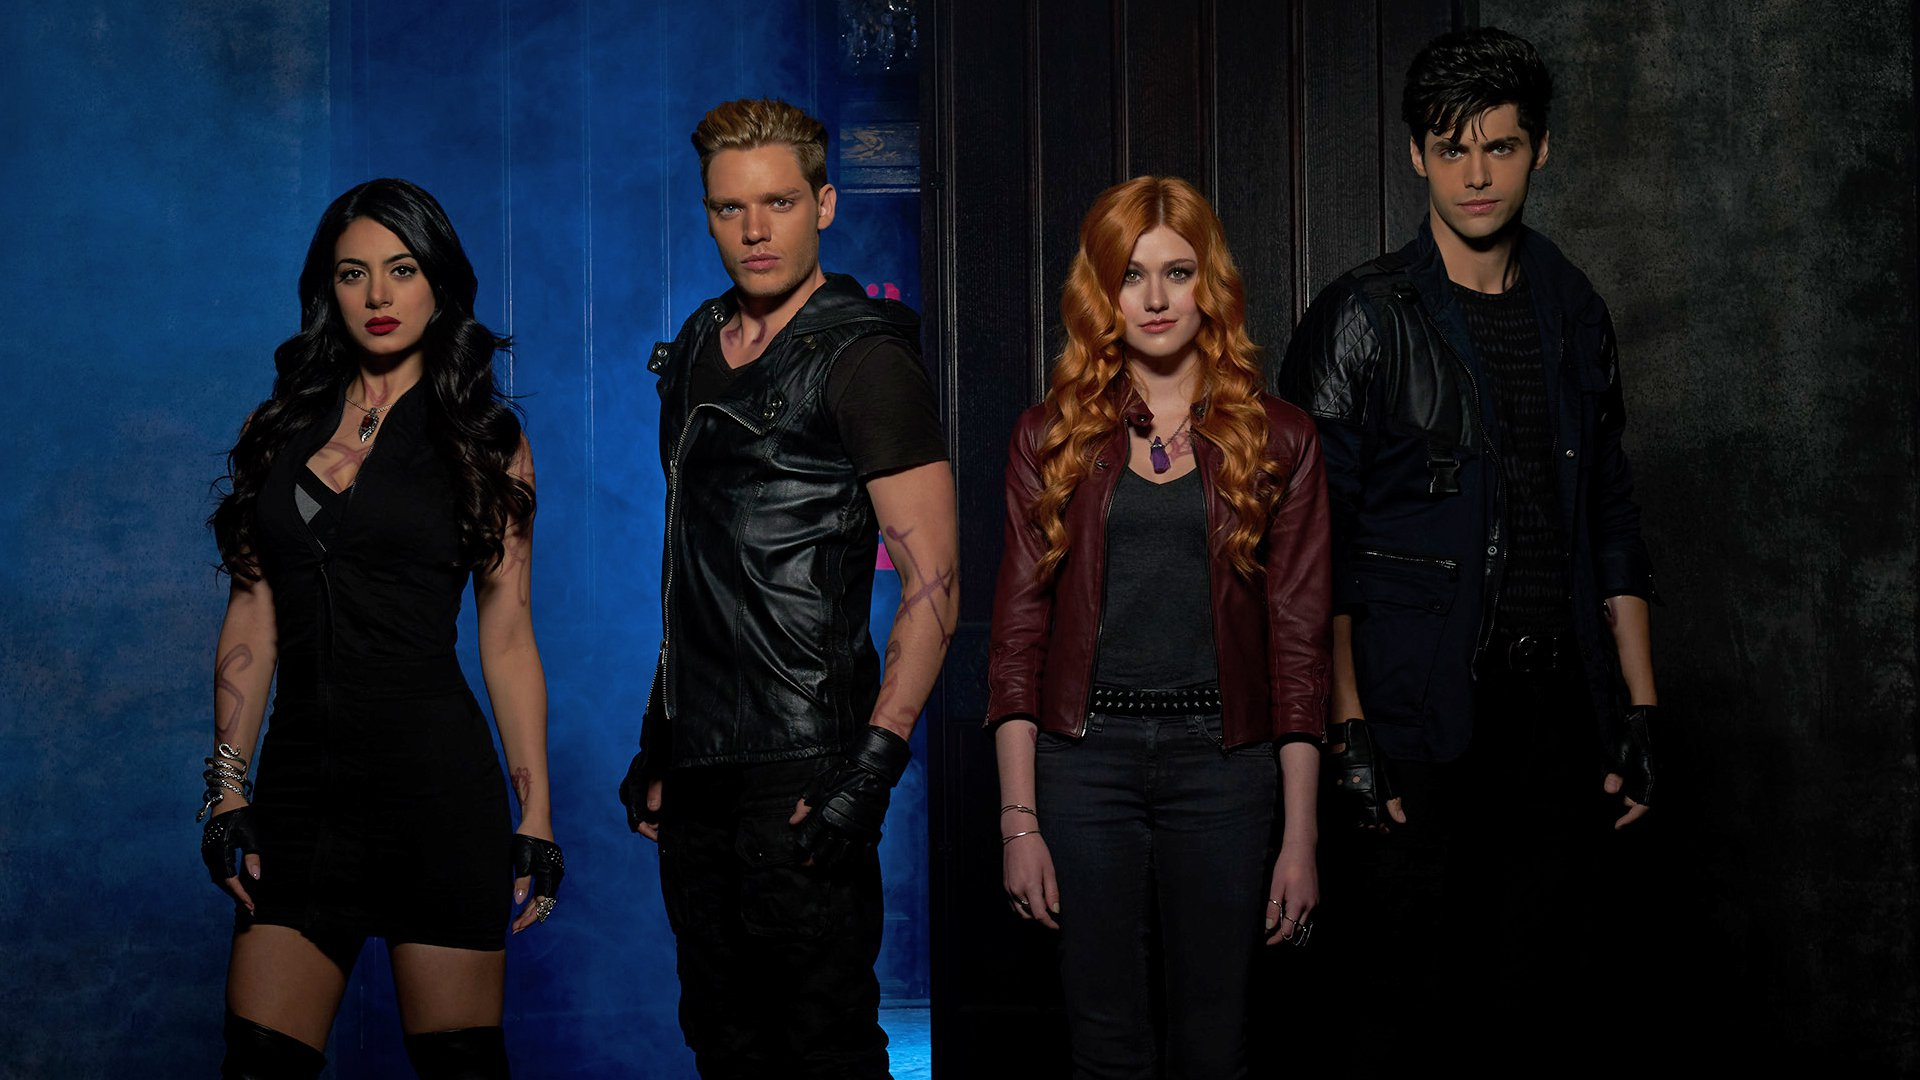 1920x1080 The Mortal Instruments-Archiv Page 2 of 4 Filmfutter